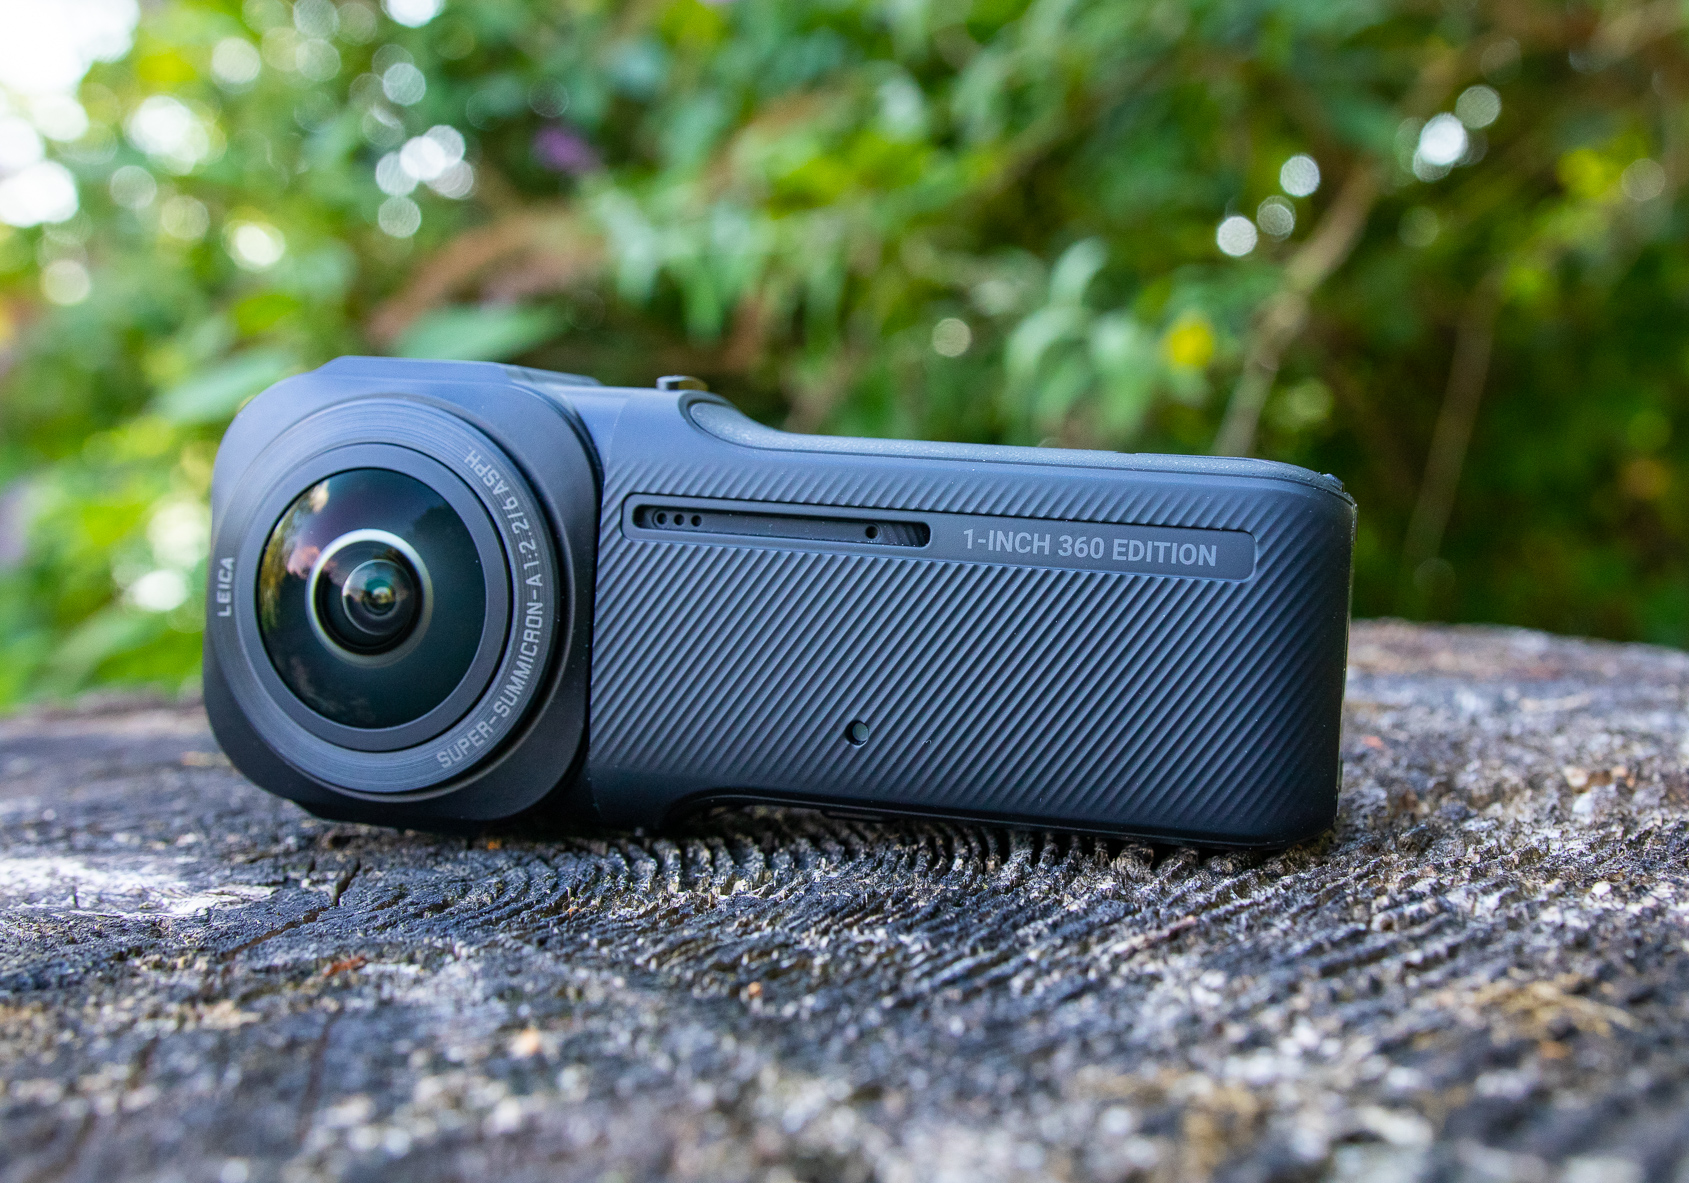 Insta360's ONE RS 1-Inch 360 Edition is a welcome and huge-sensored  addition to the ONE RS family - A review